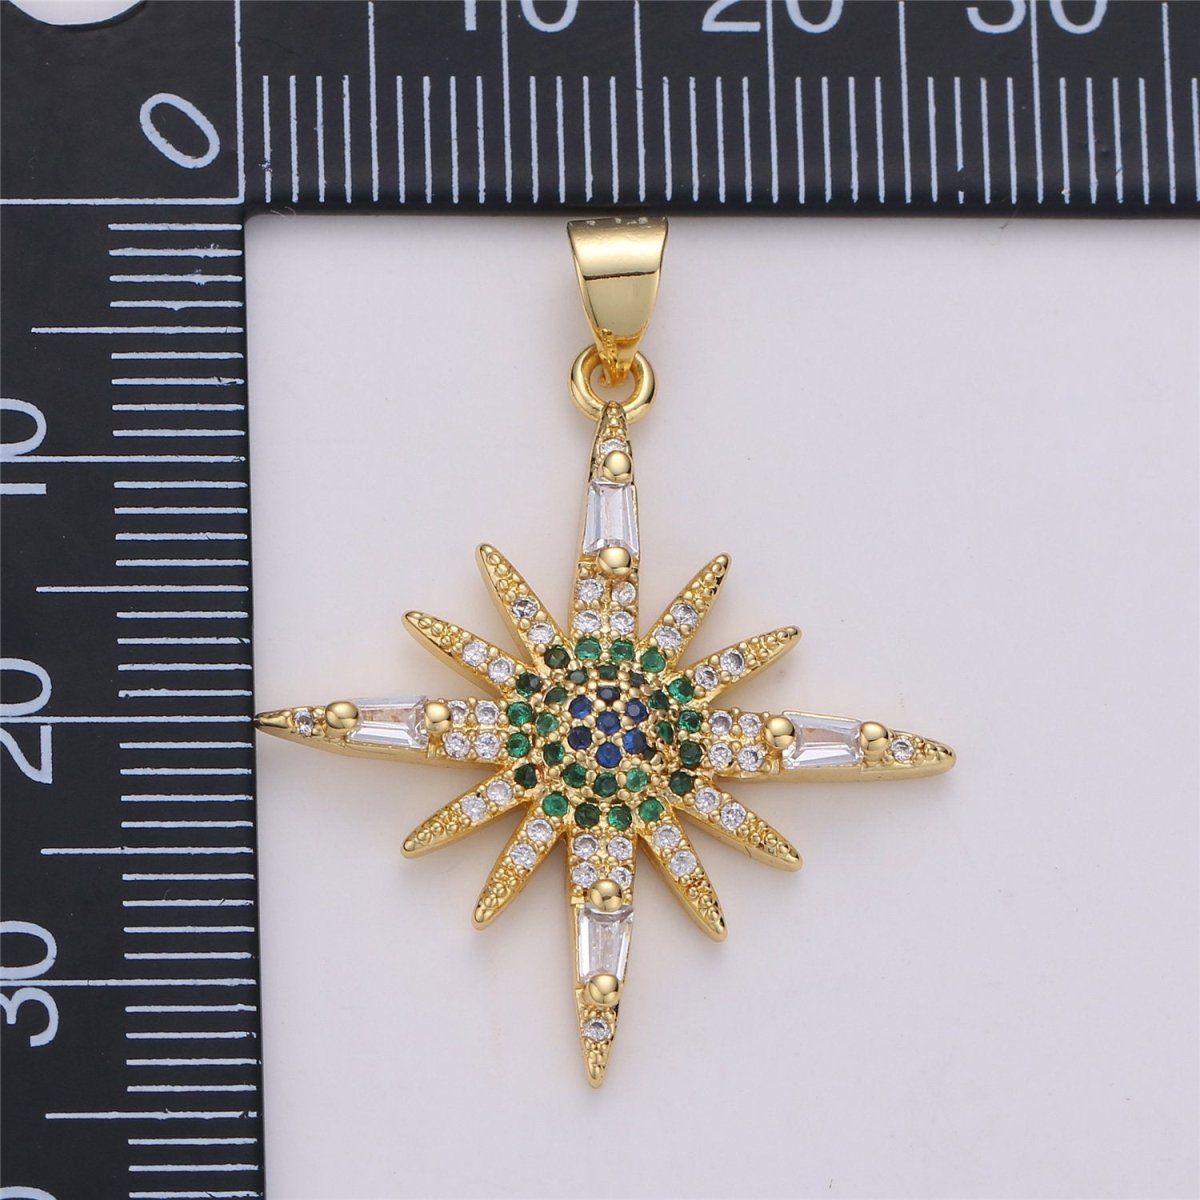 24K Gold Filled Dainty Sunburst Shining Star with Micro Pave Multi Color Cubic Zirconia CZ Stone for Necklace or Earrings I-572 - DLUXCA